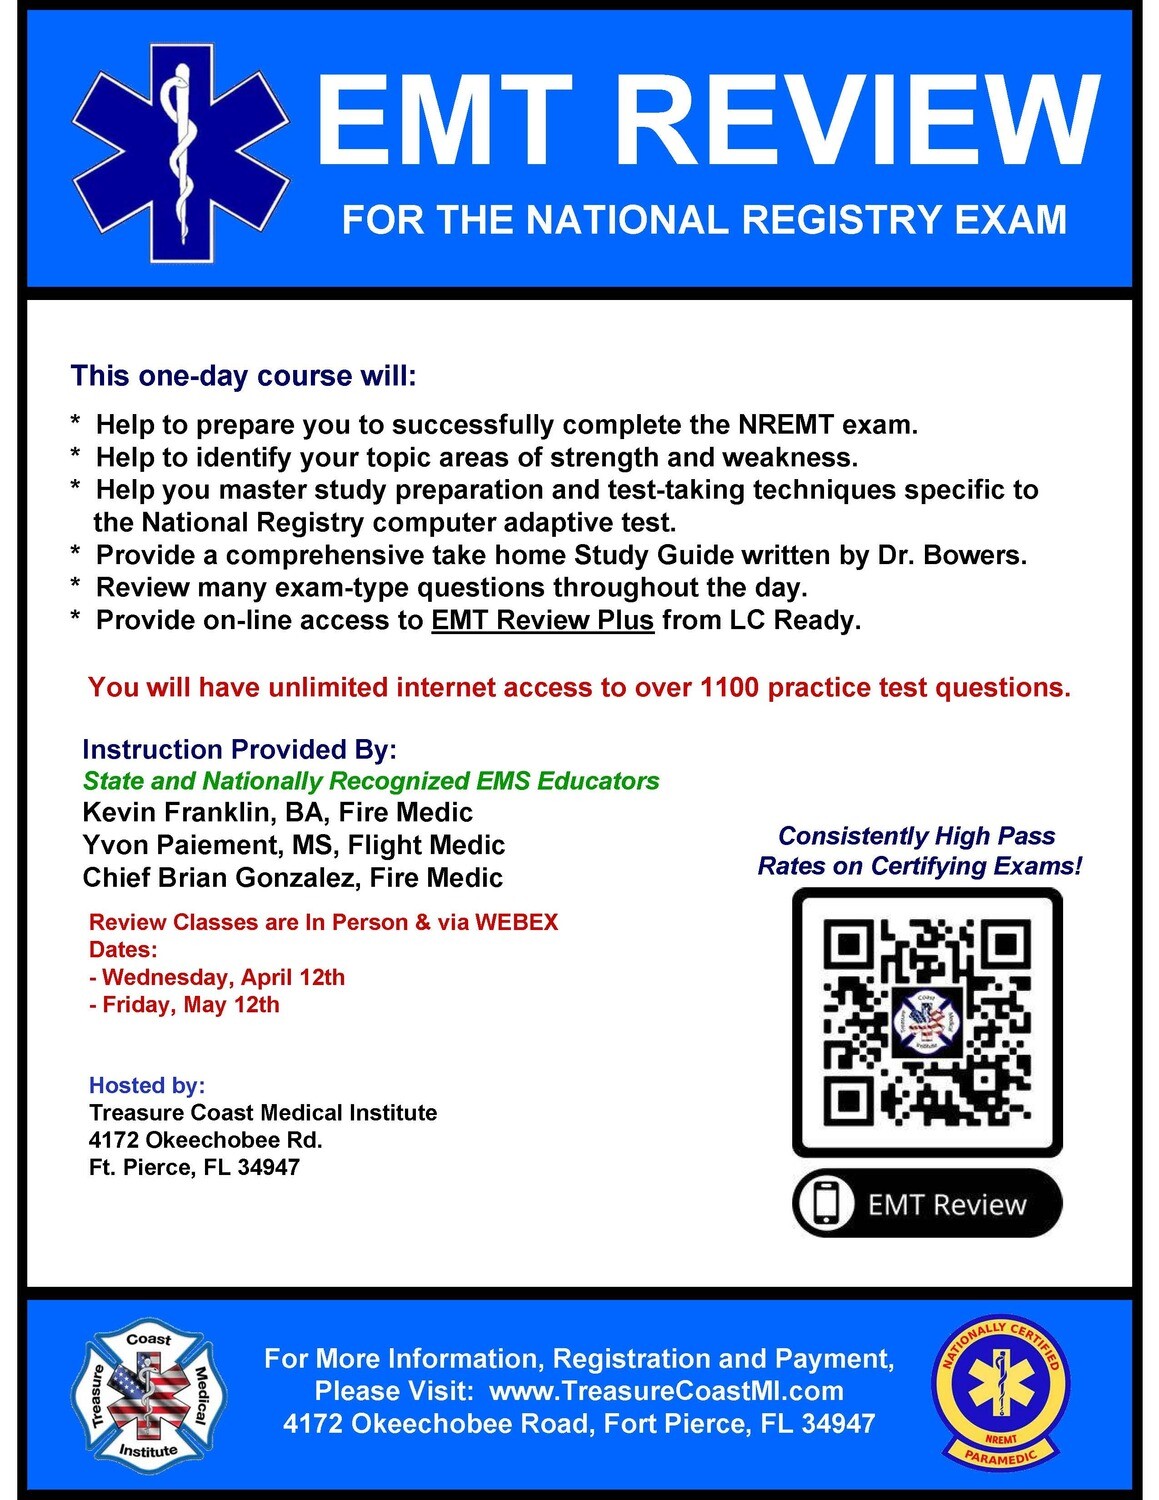 National Registry EMT Review May 18th Fort Pierce TCMI (IN PERSON)